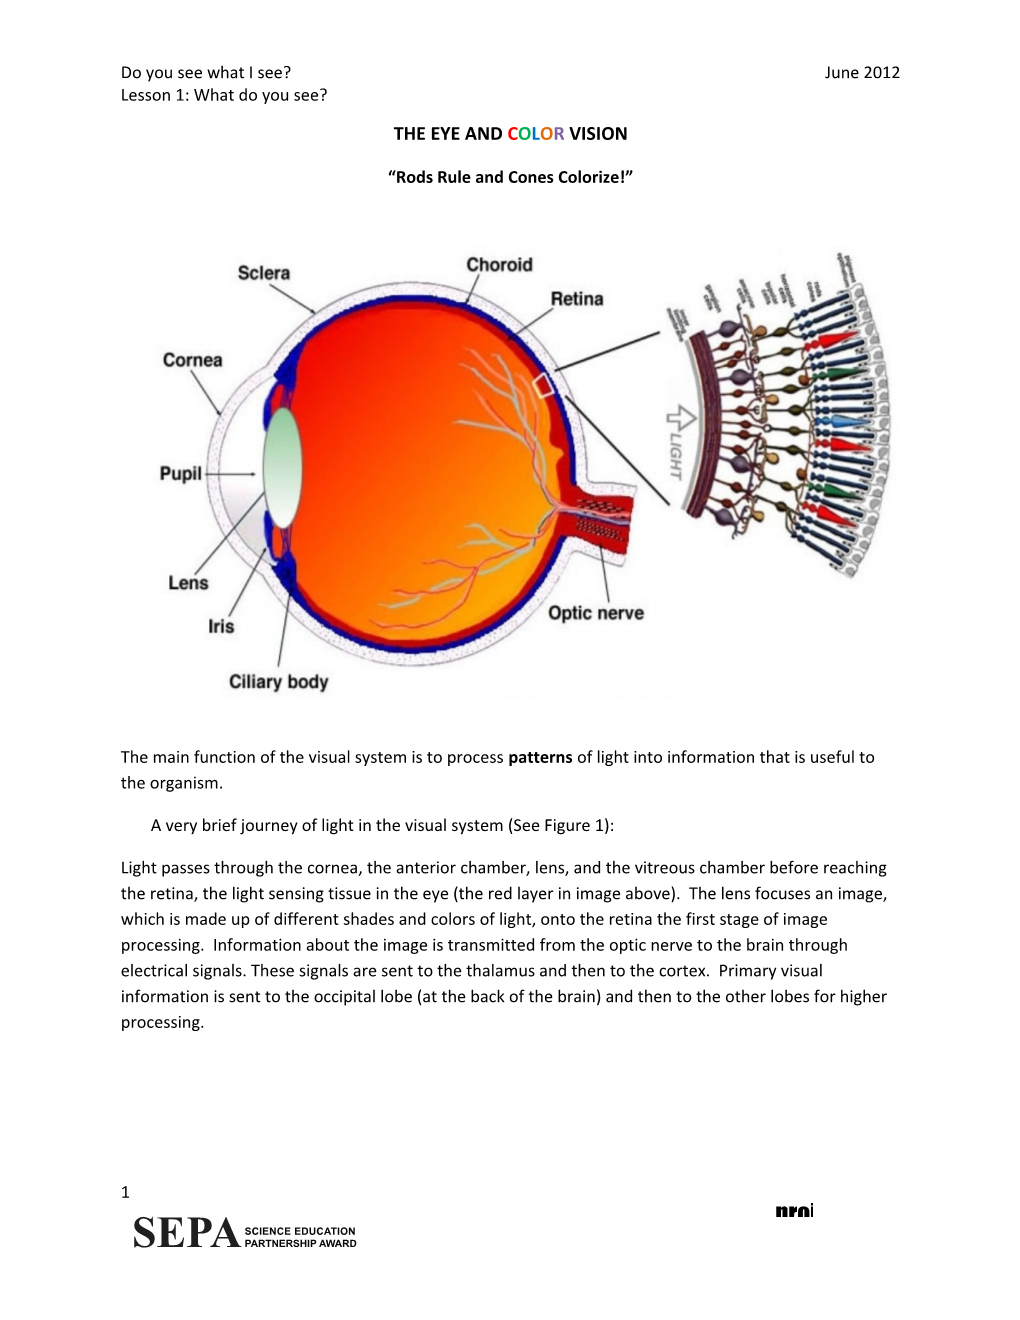 The Eye and Color Vision